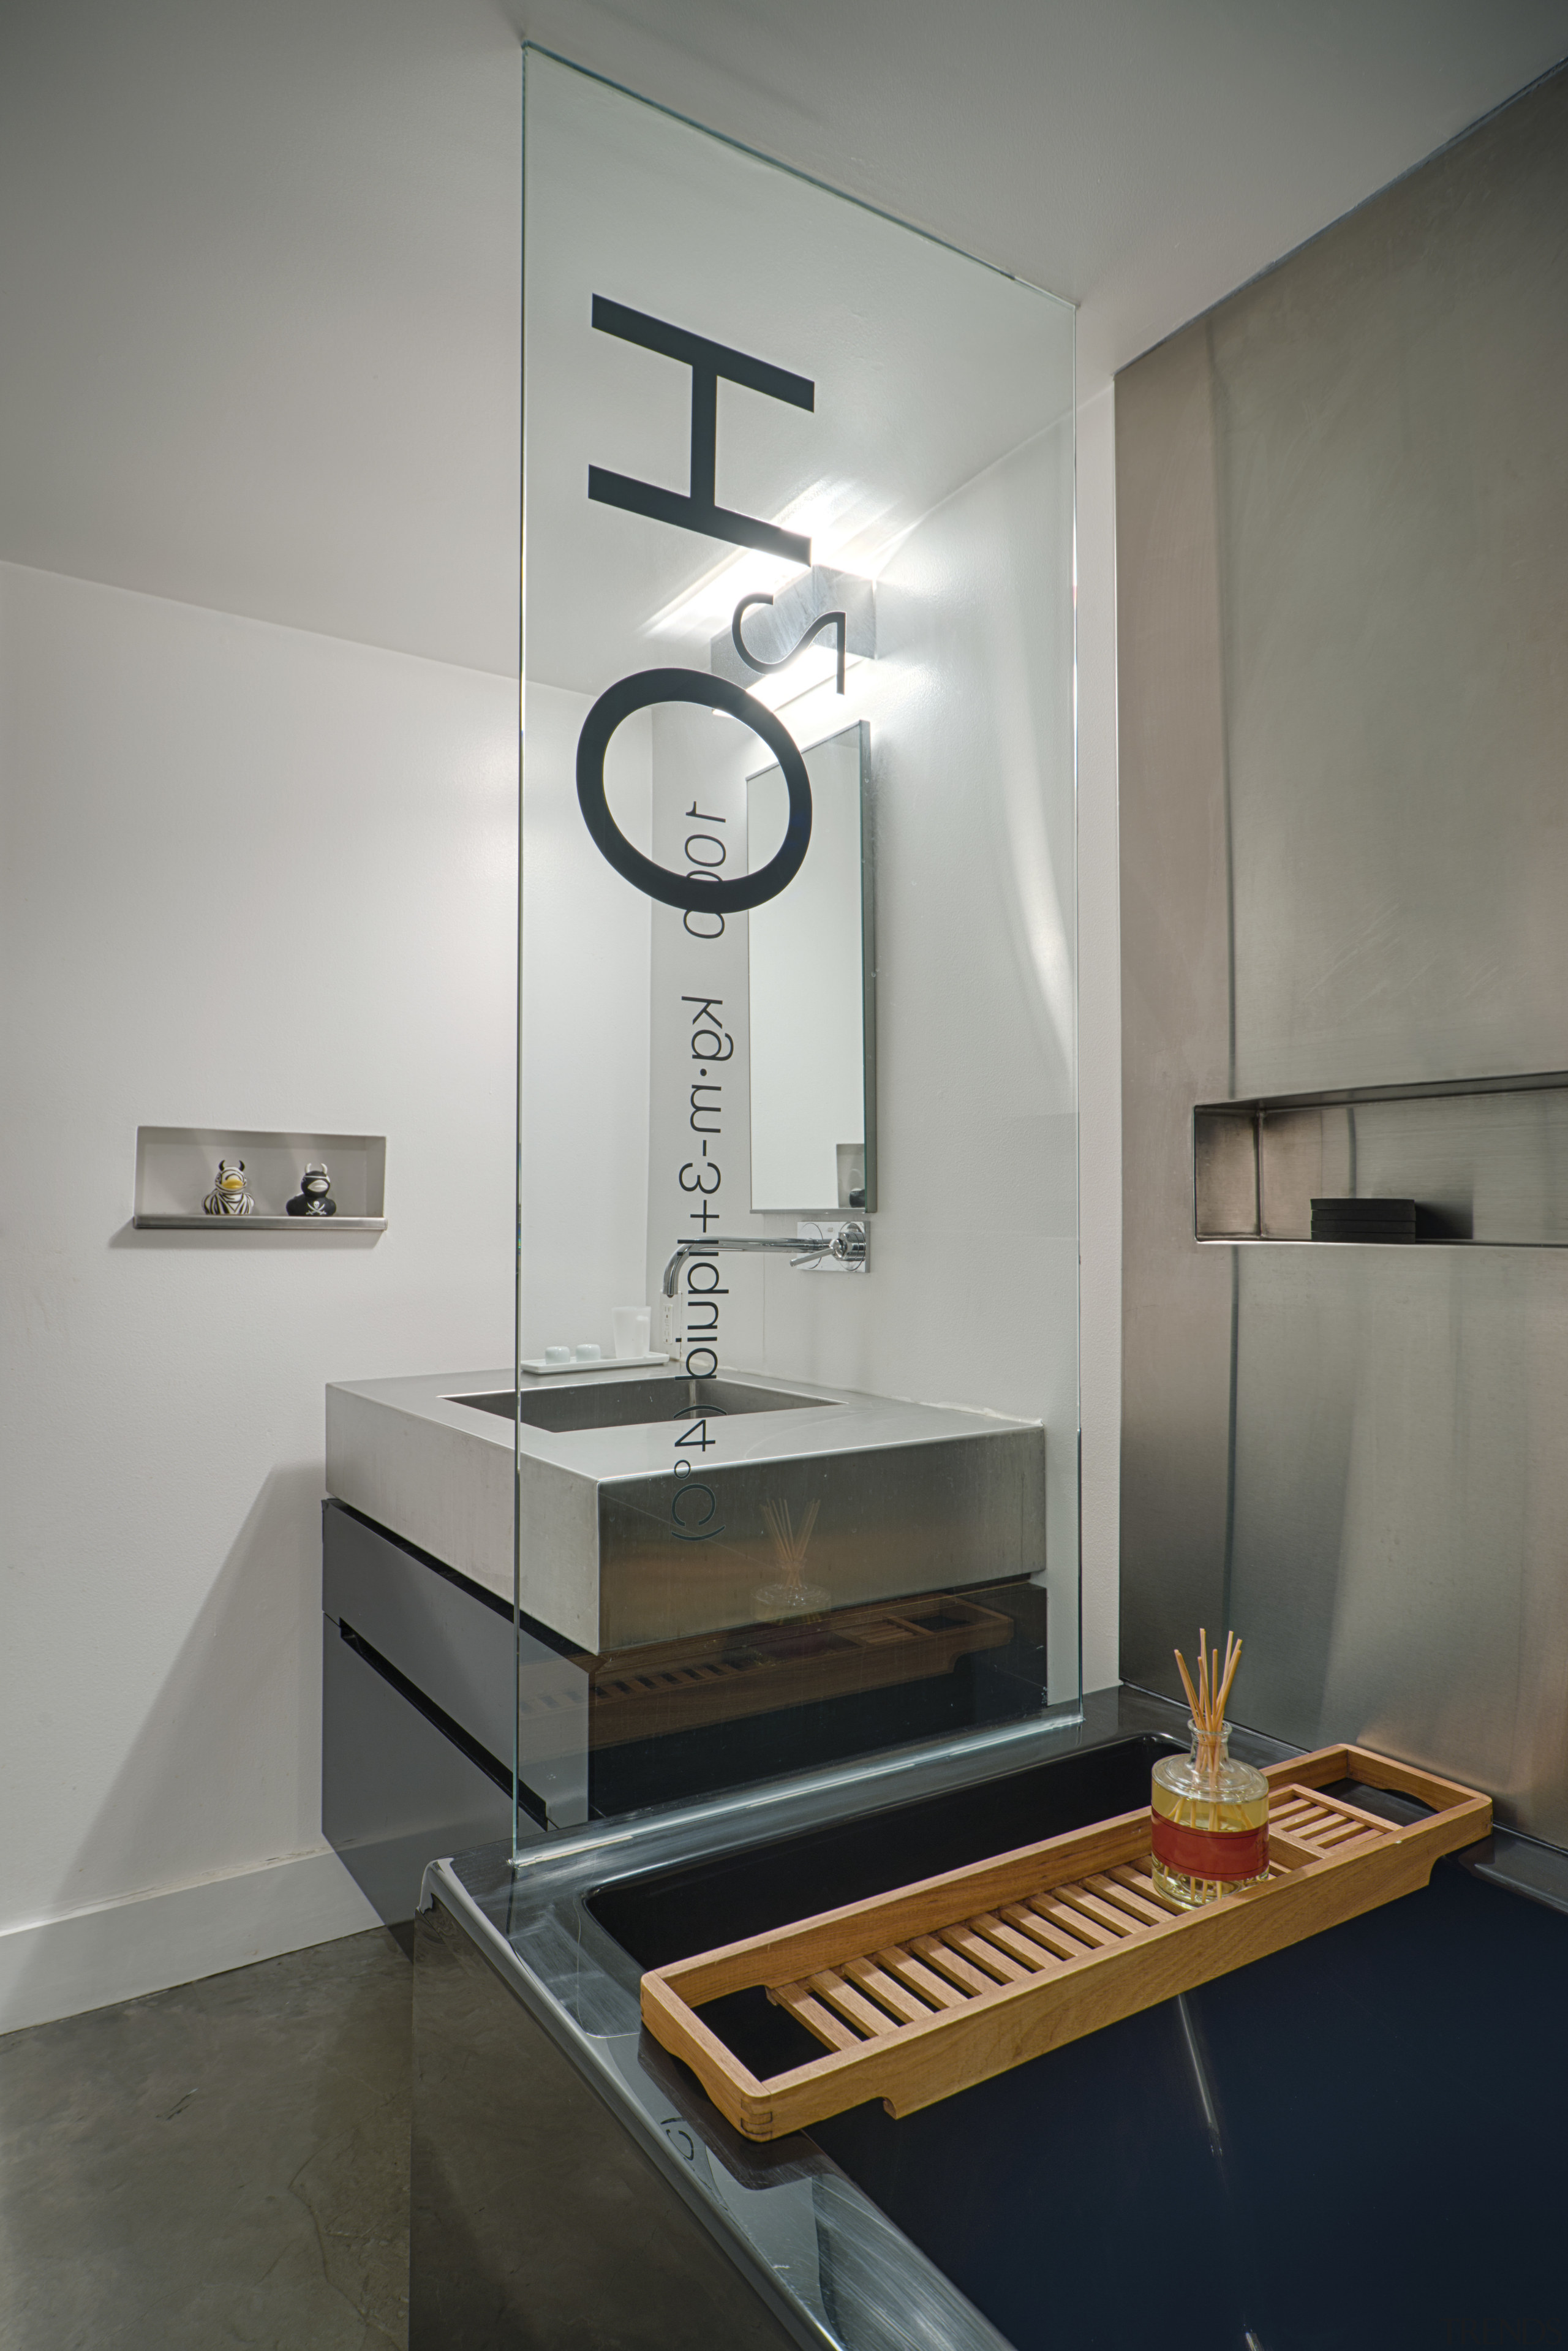 A glass dividing wall and stainless steel vanity bathroom, countertop, interior design, product design, sink, tap, gray